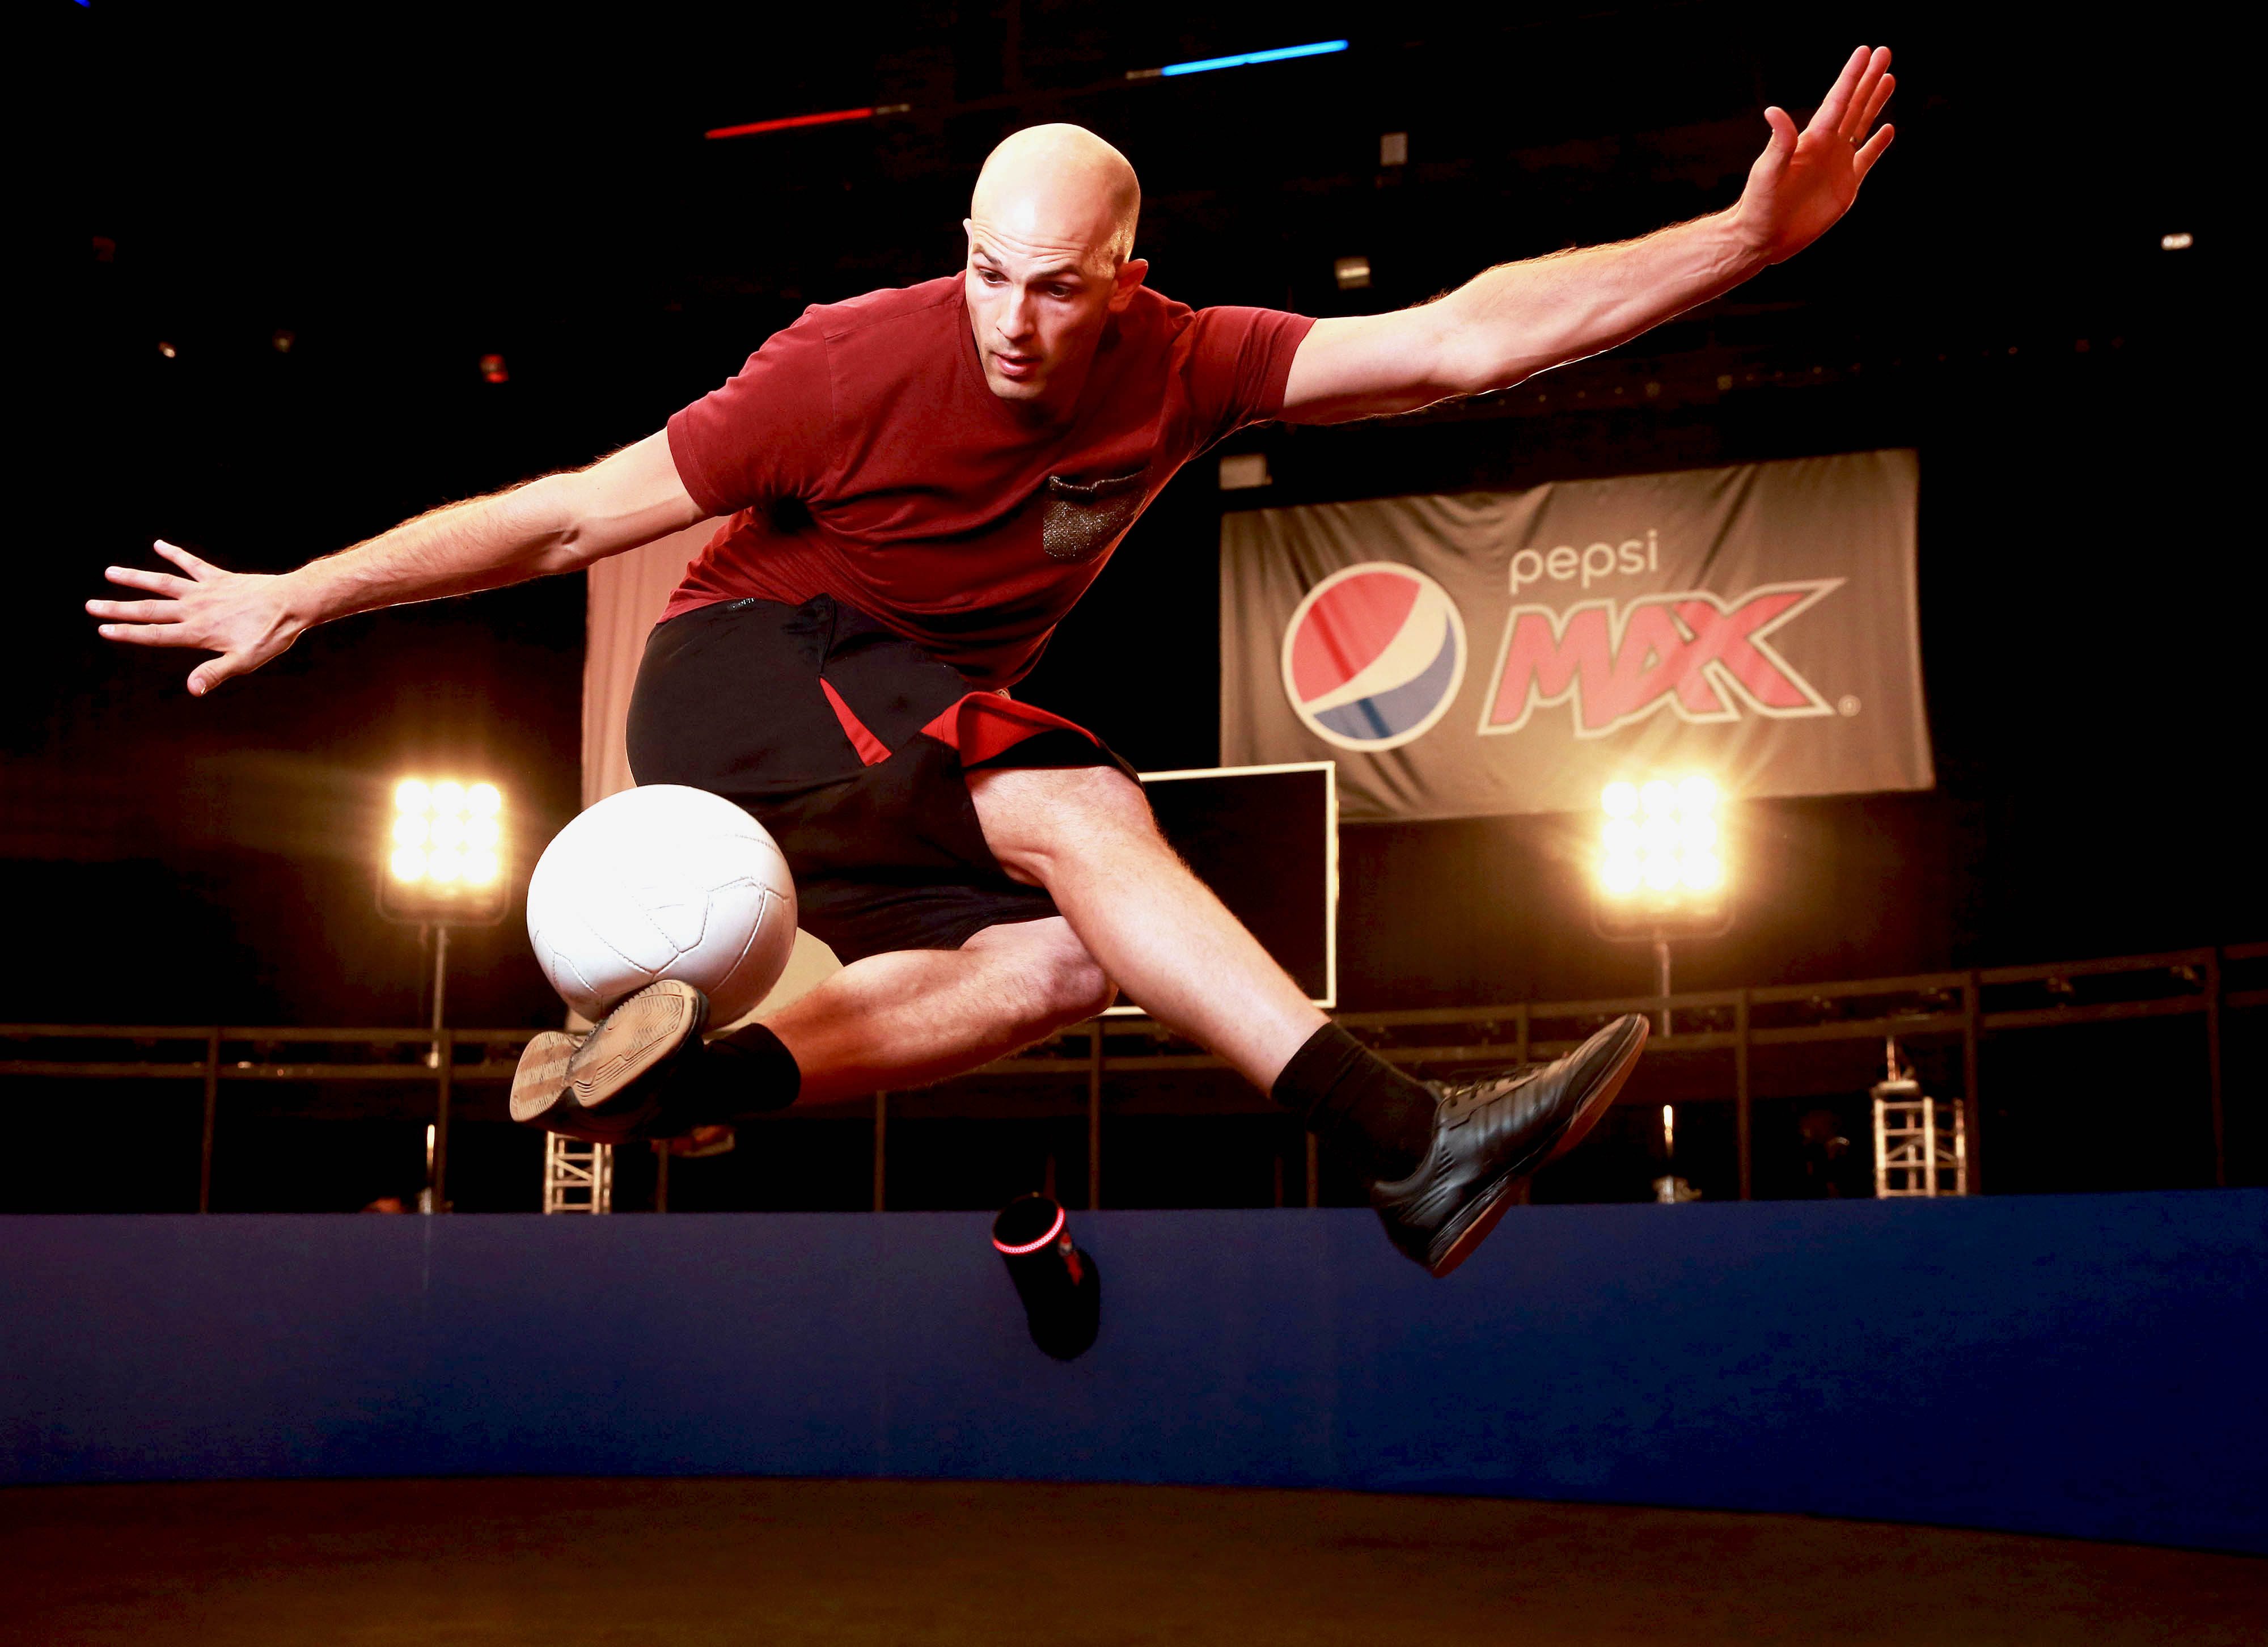 Max football volleys with ‘VOLLEY 360’ and PEPSI MAX®